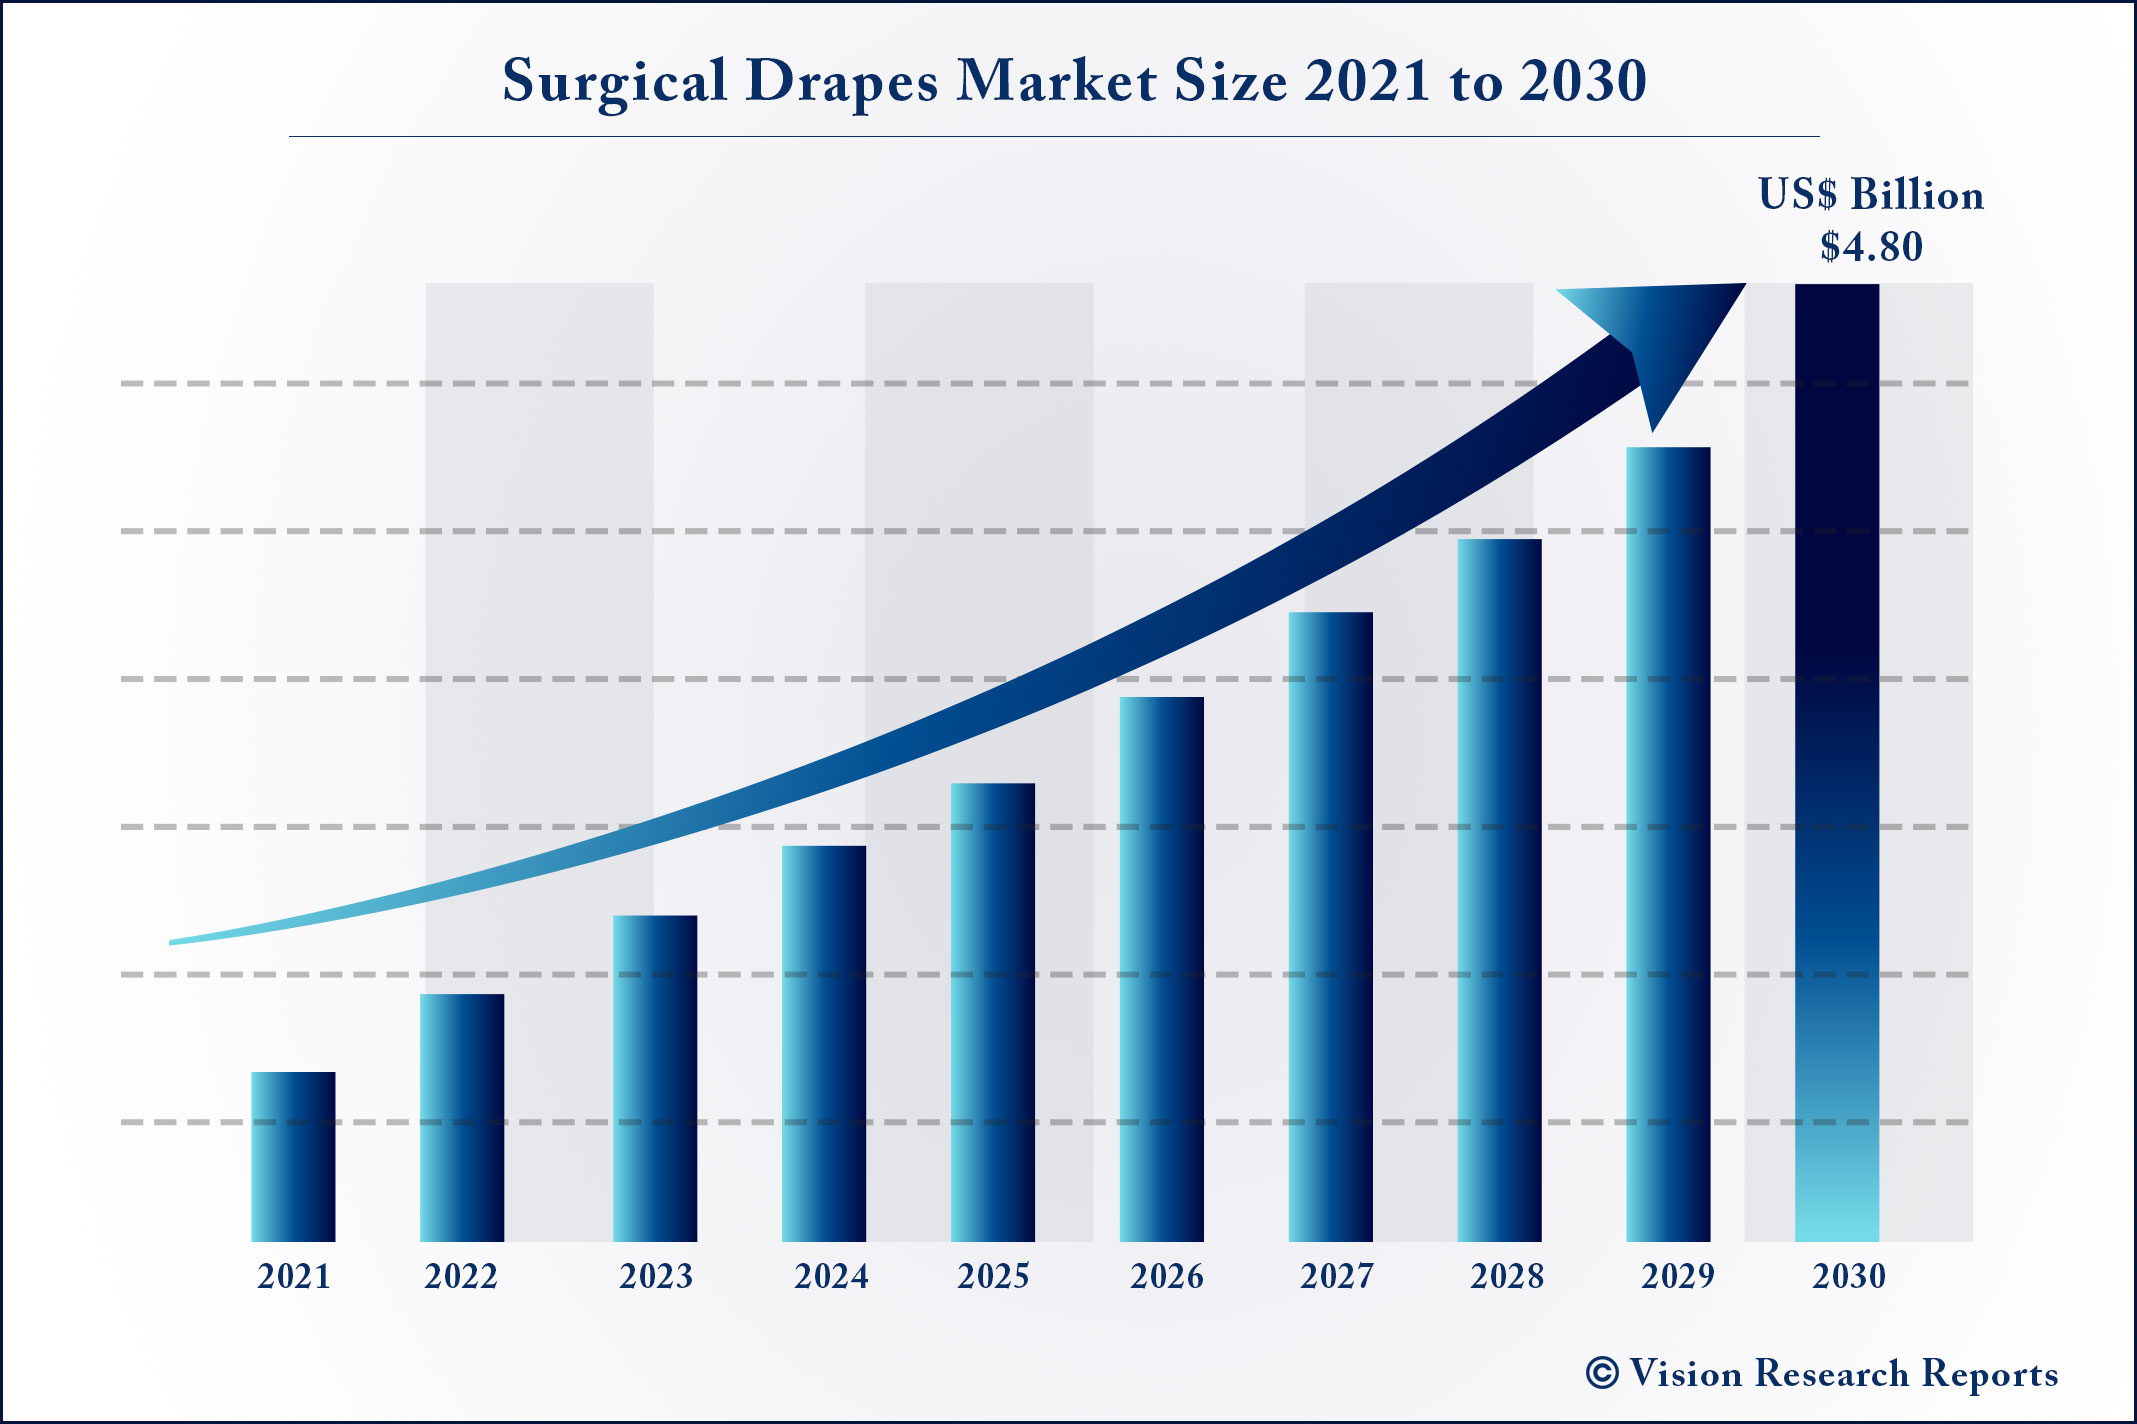 Surgical Drapes Market Size 2021 to 2030